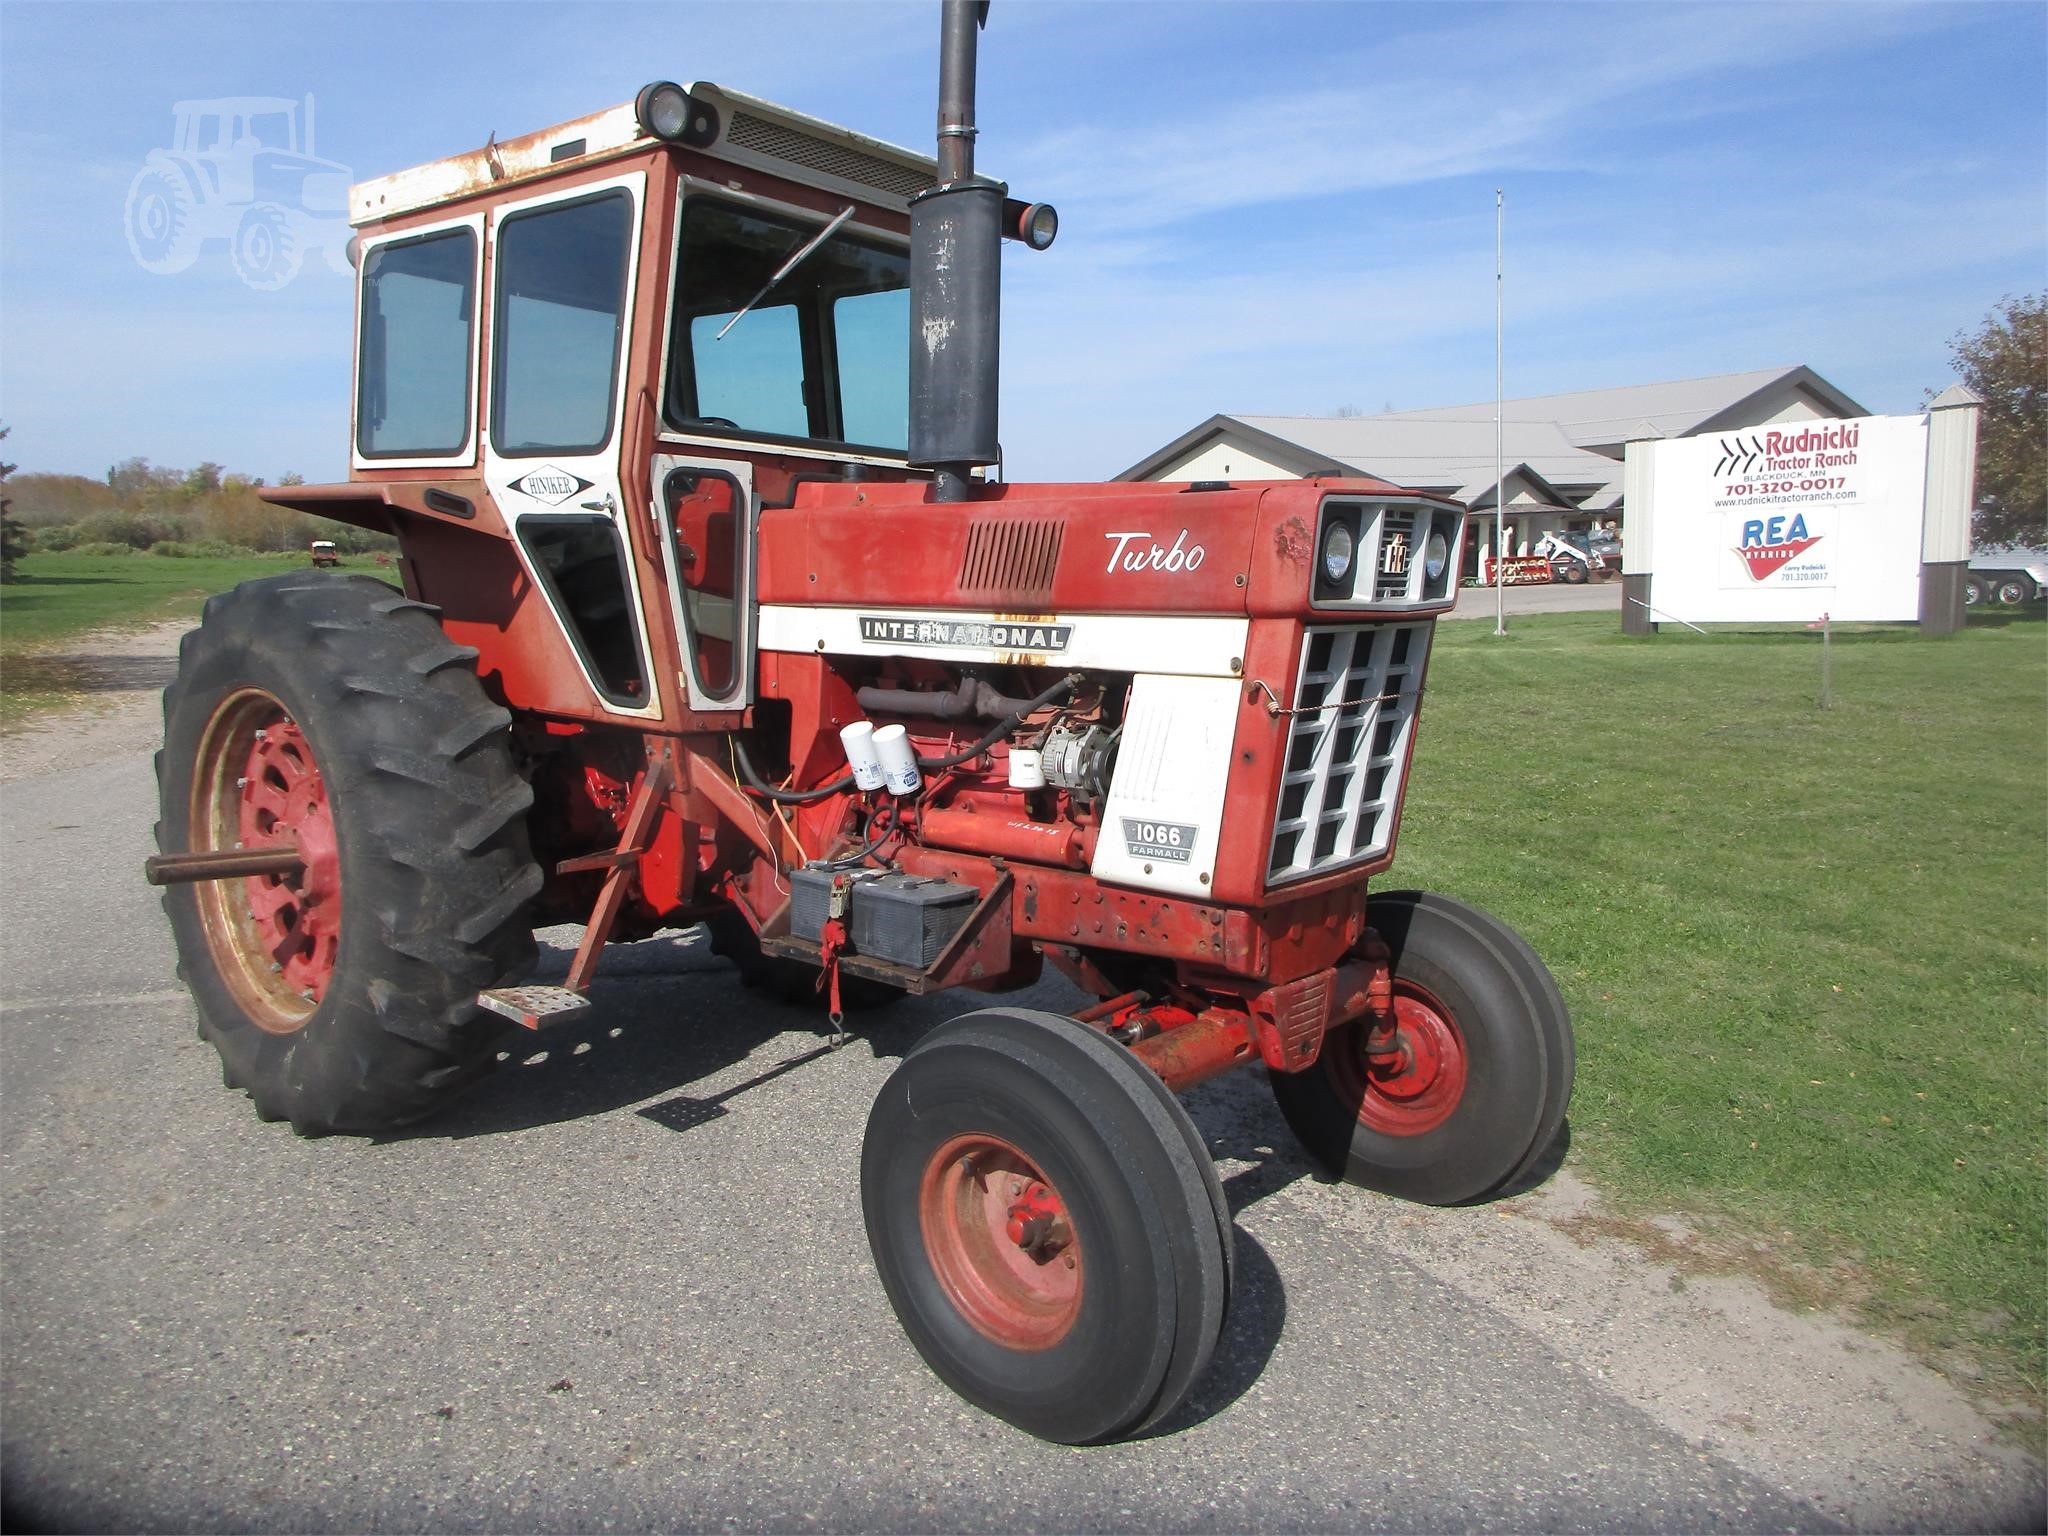 Farm Equipment For Sale In Minnesota - 8779 Listings Tractorhousecom - Page 1 Of 352